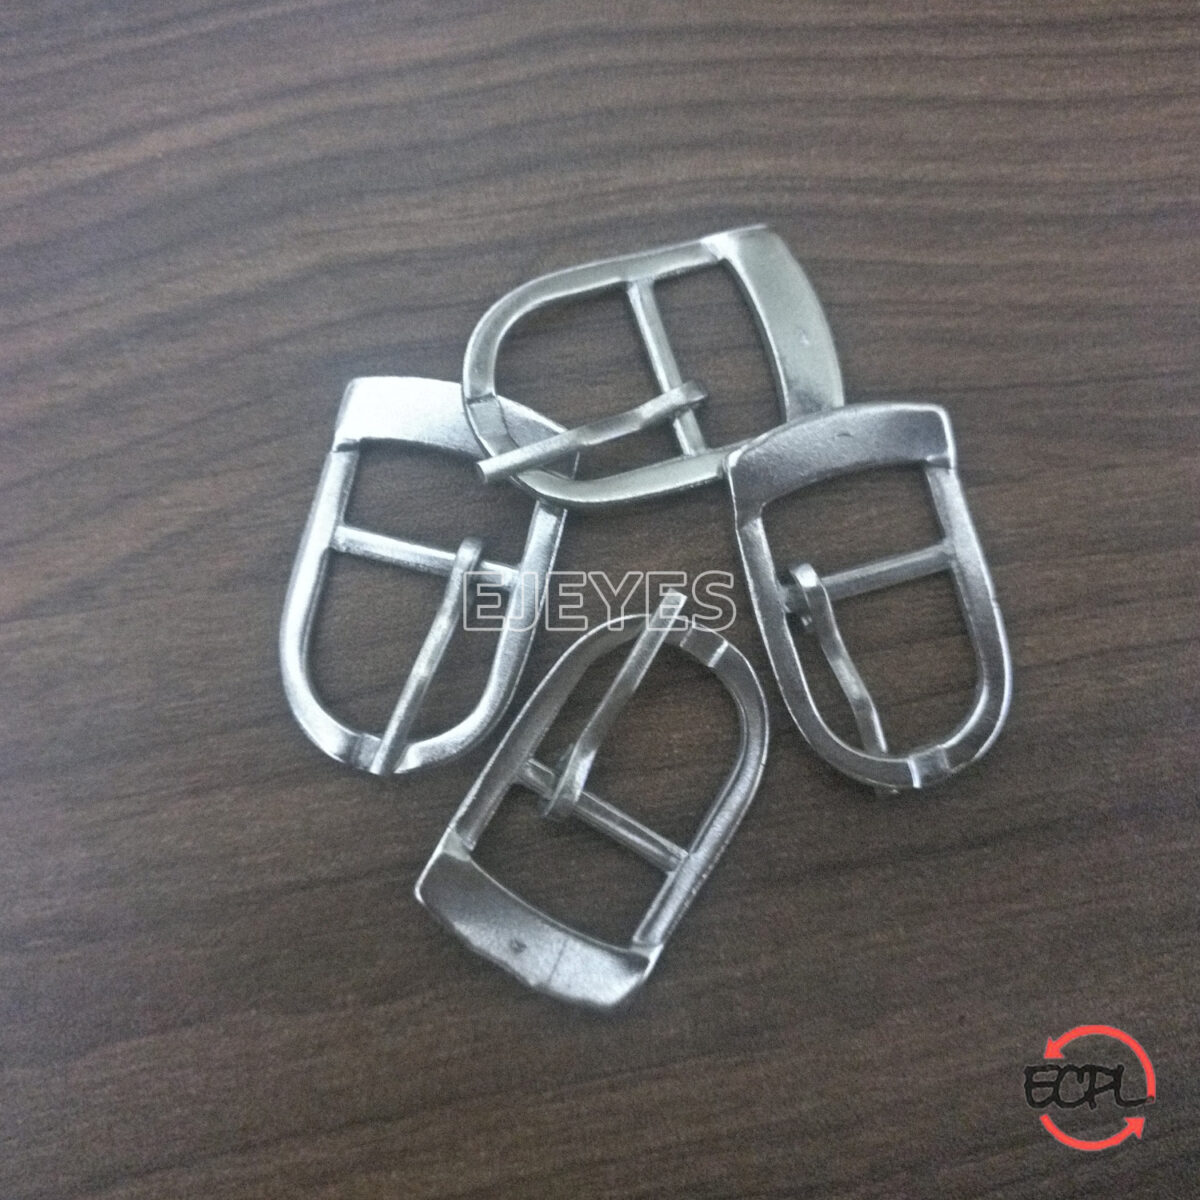 Oval buckles made of mild steel with a nickel plating that are 15 mm wide, dependable, and useful for many different hardware applications.